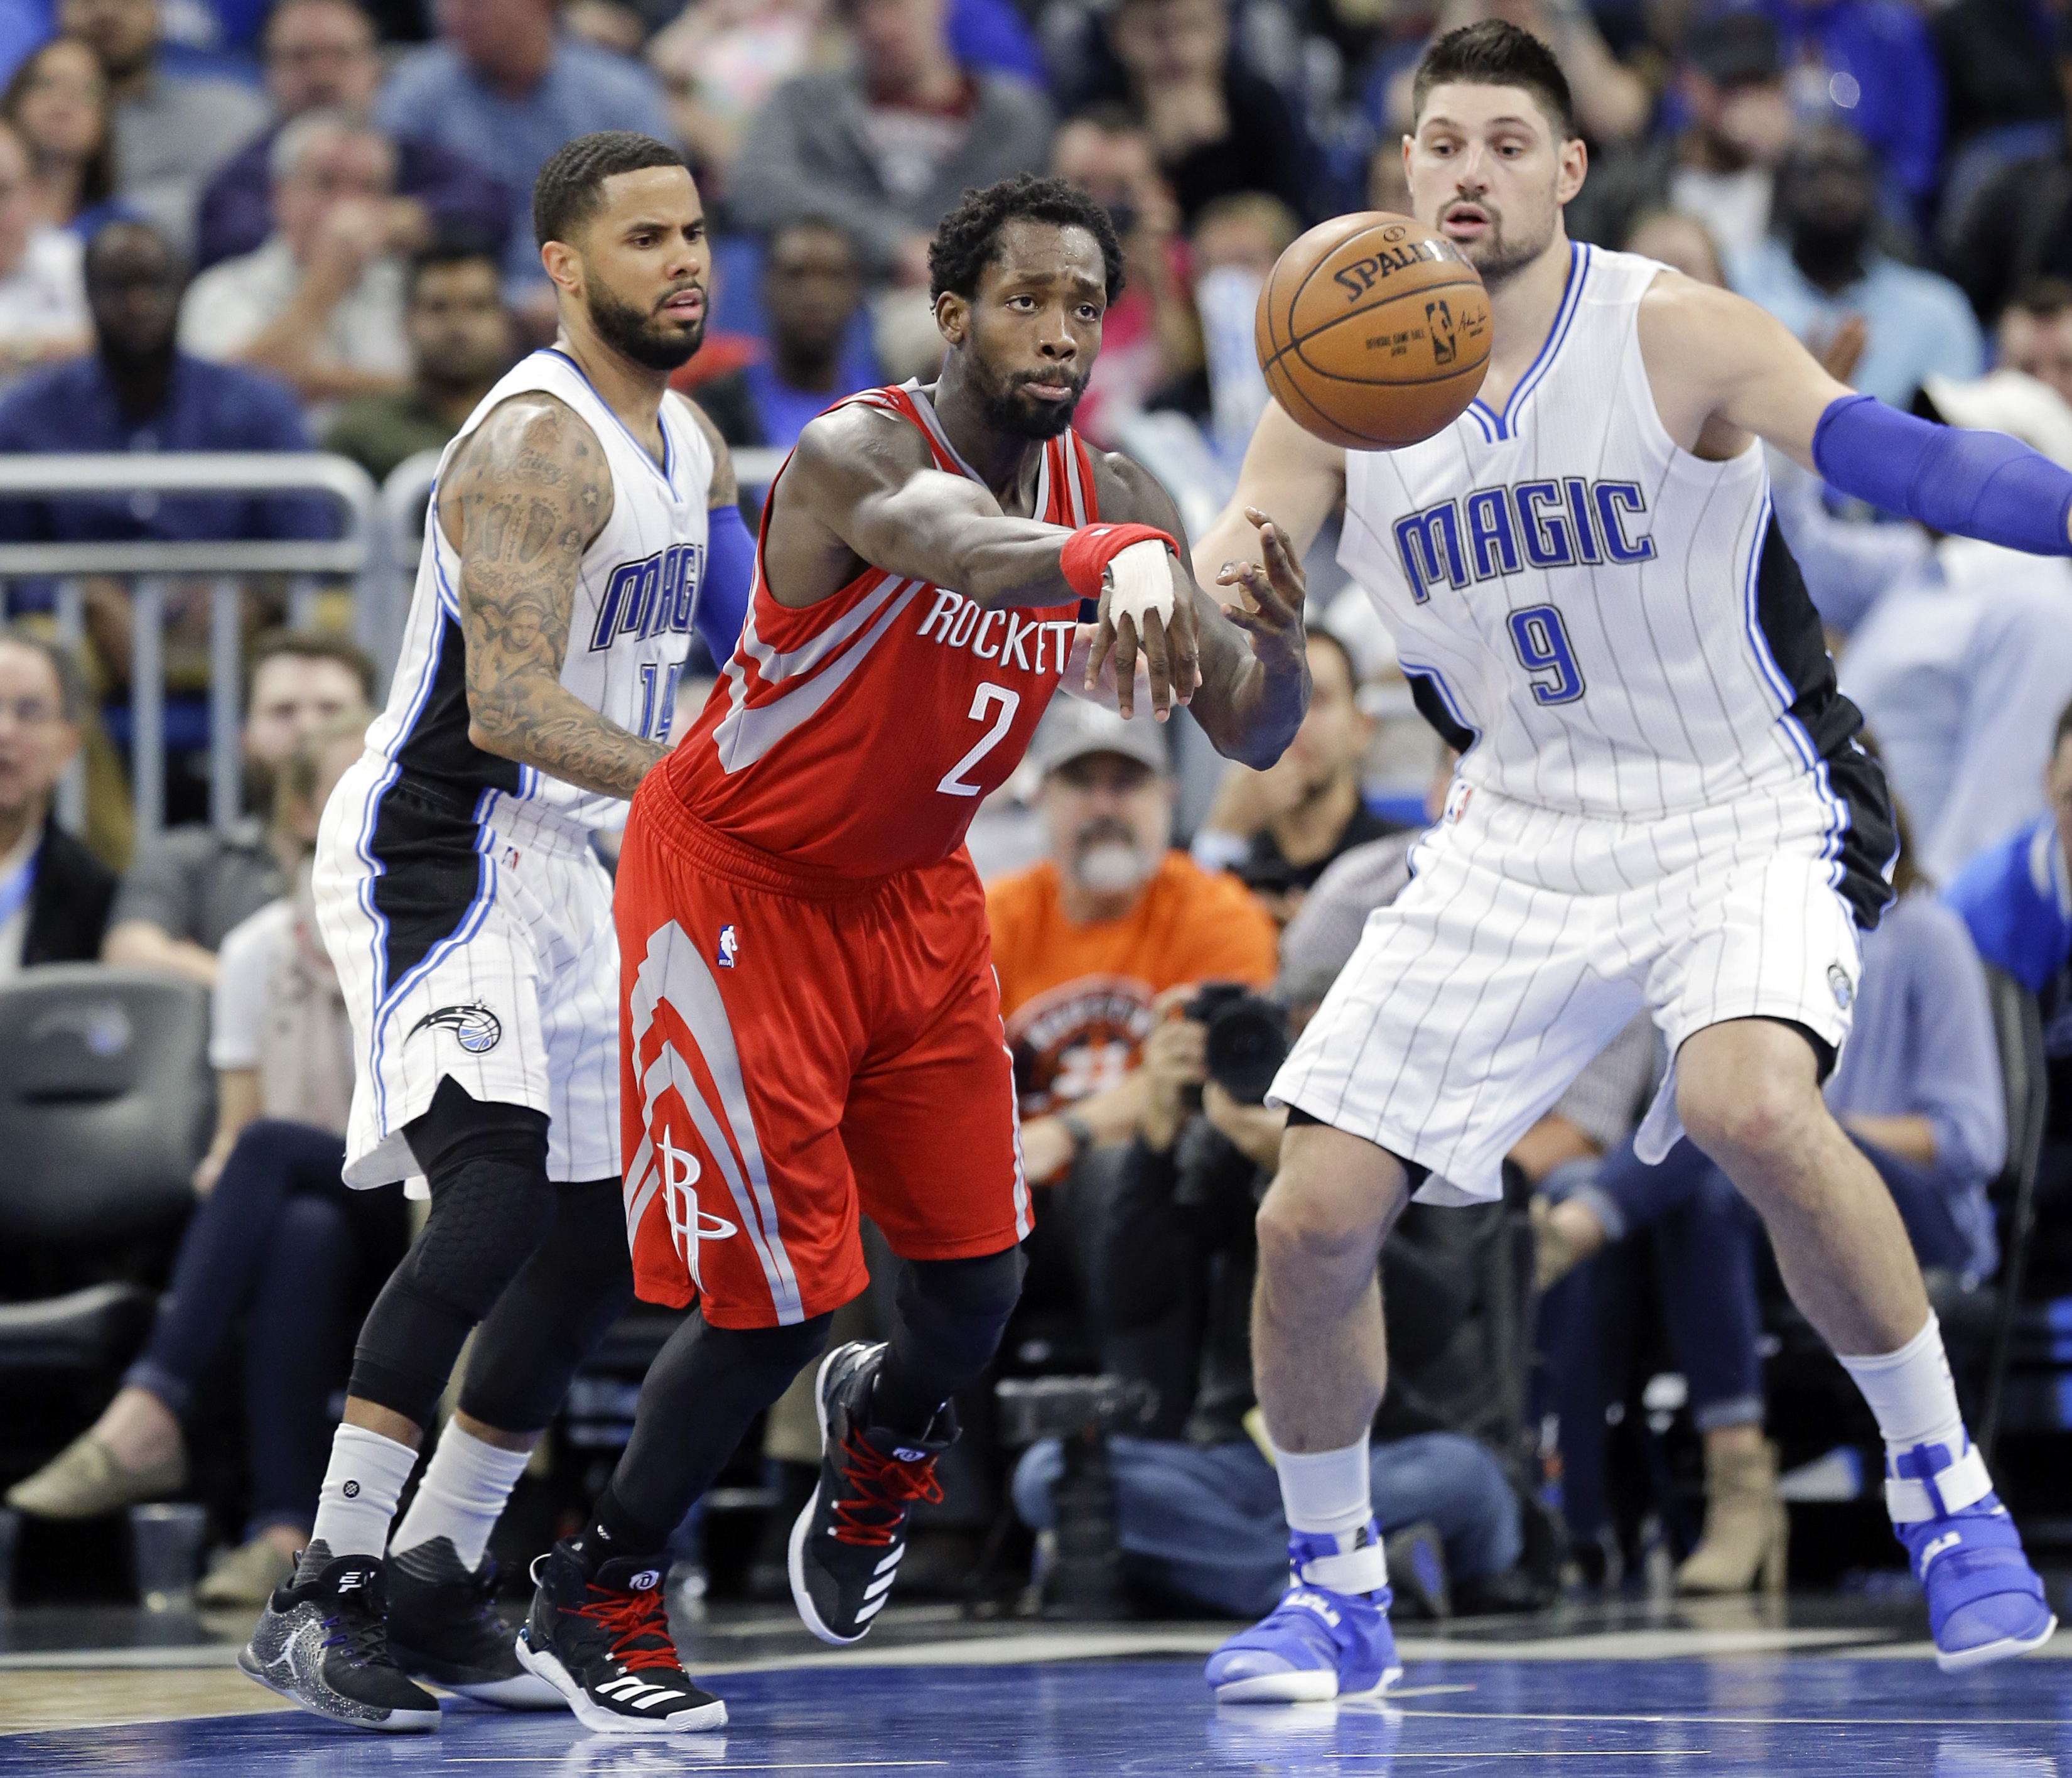 Houston Rockets' Patrick Beverley (2) passes the ball as he is guarded by Orlando Magic's D.J. Augustin, left, and Nikola Vucevic (9) during the second half of an NBA basketball game, Friday, Jan. 6, 2017, in Orlando, Fla. AP